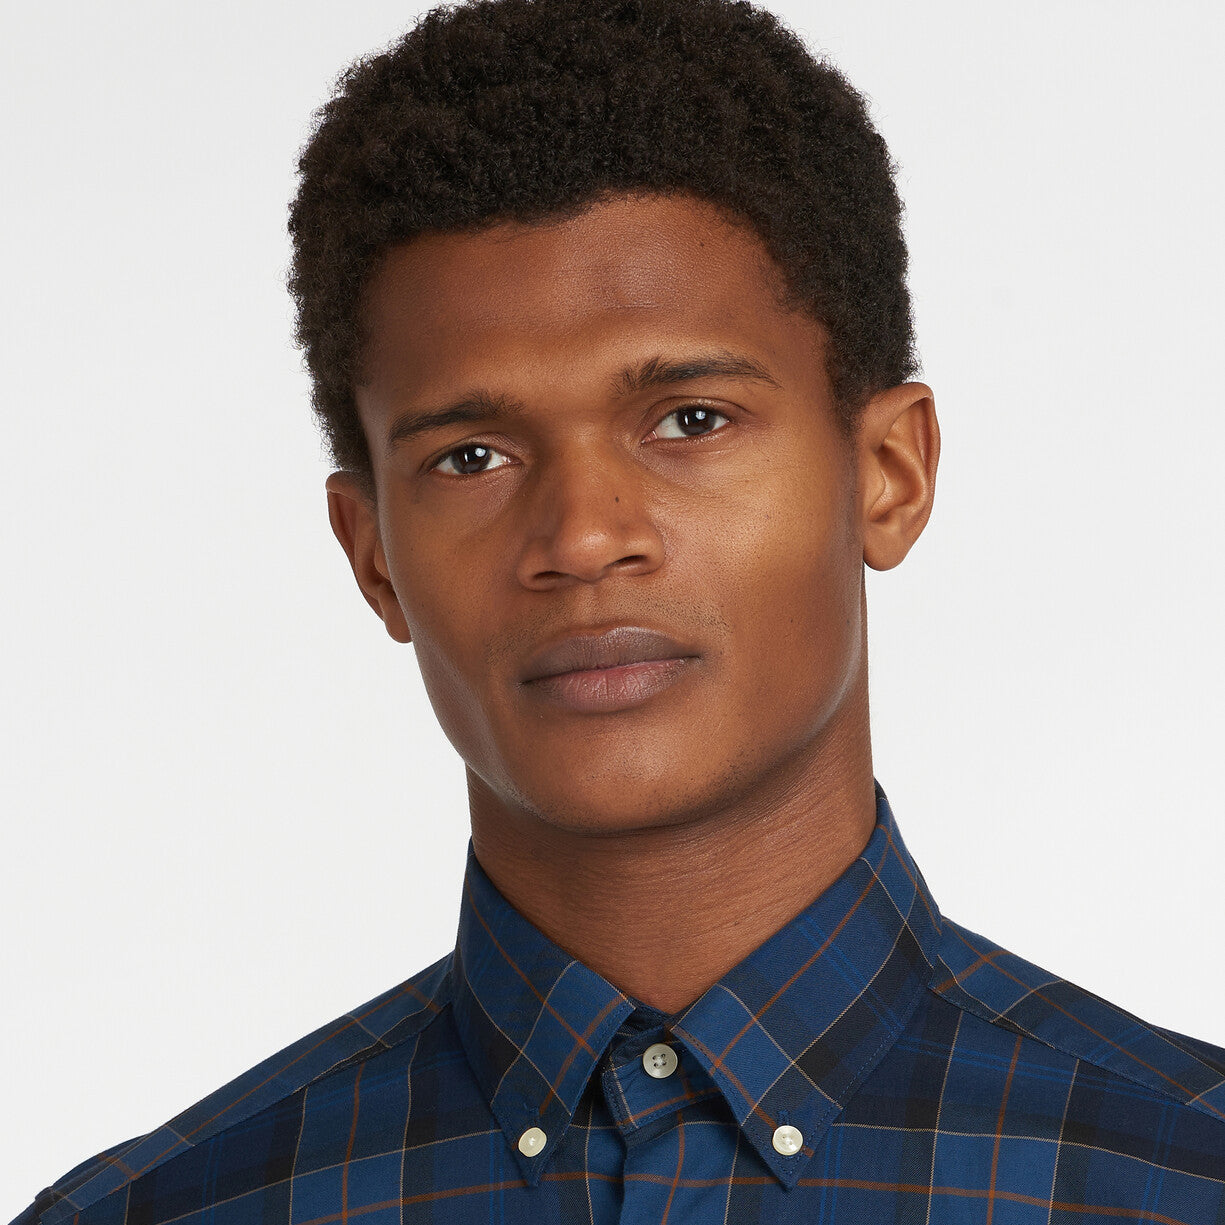 Barbour Wetheram Midnight Tailored Fit Shirt